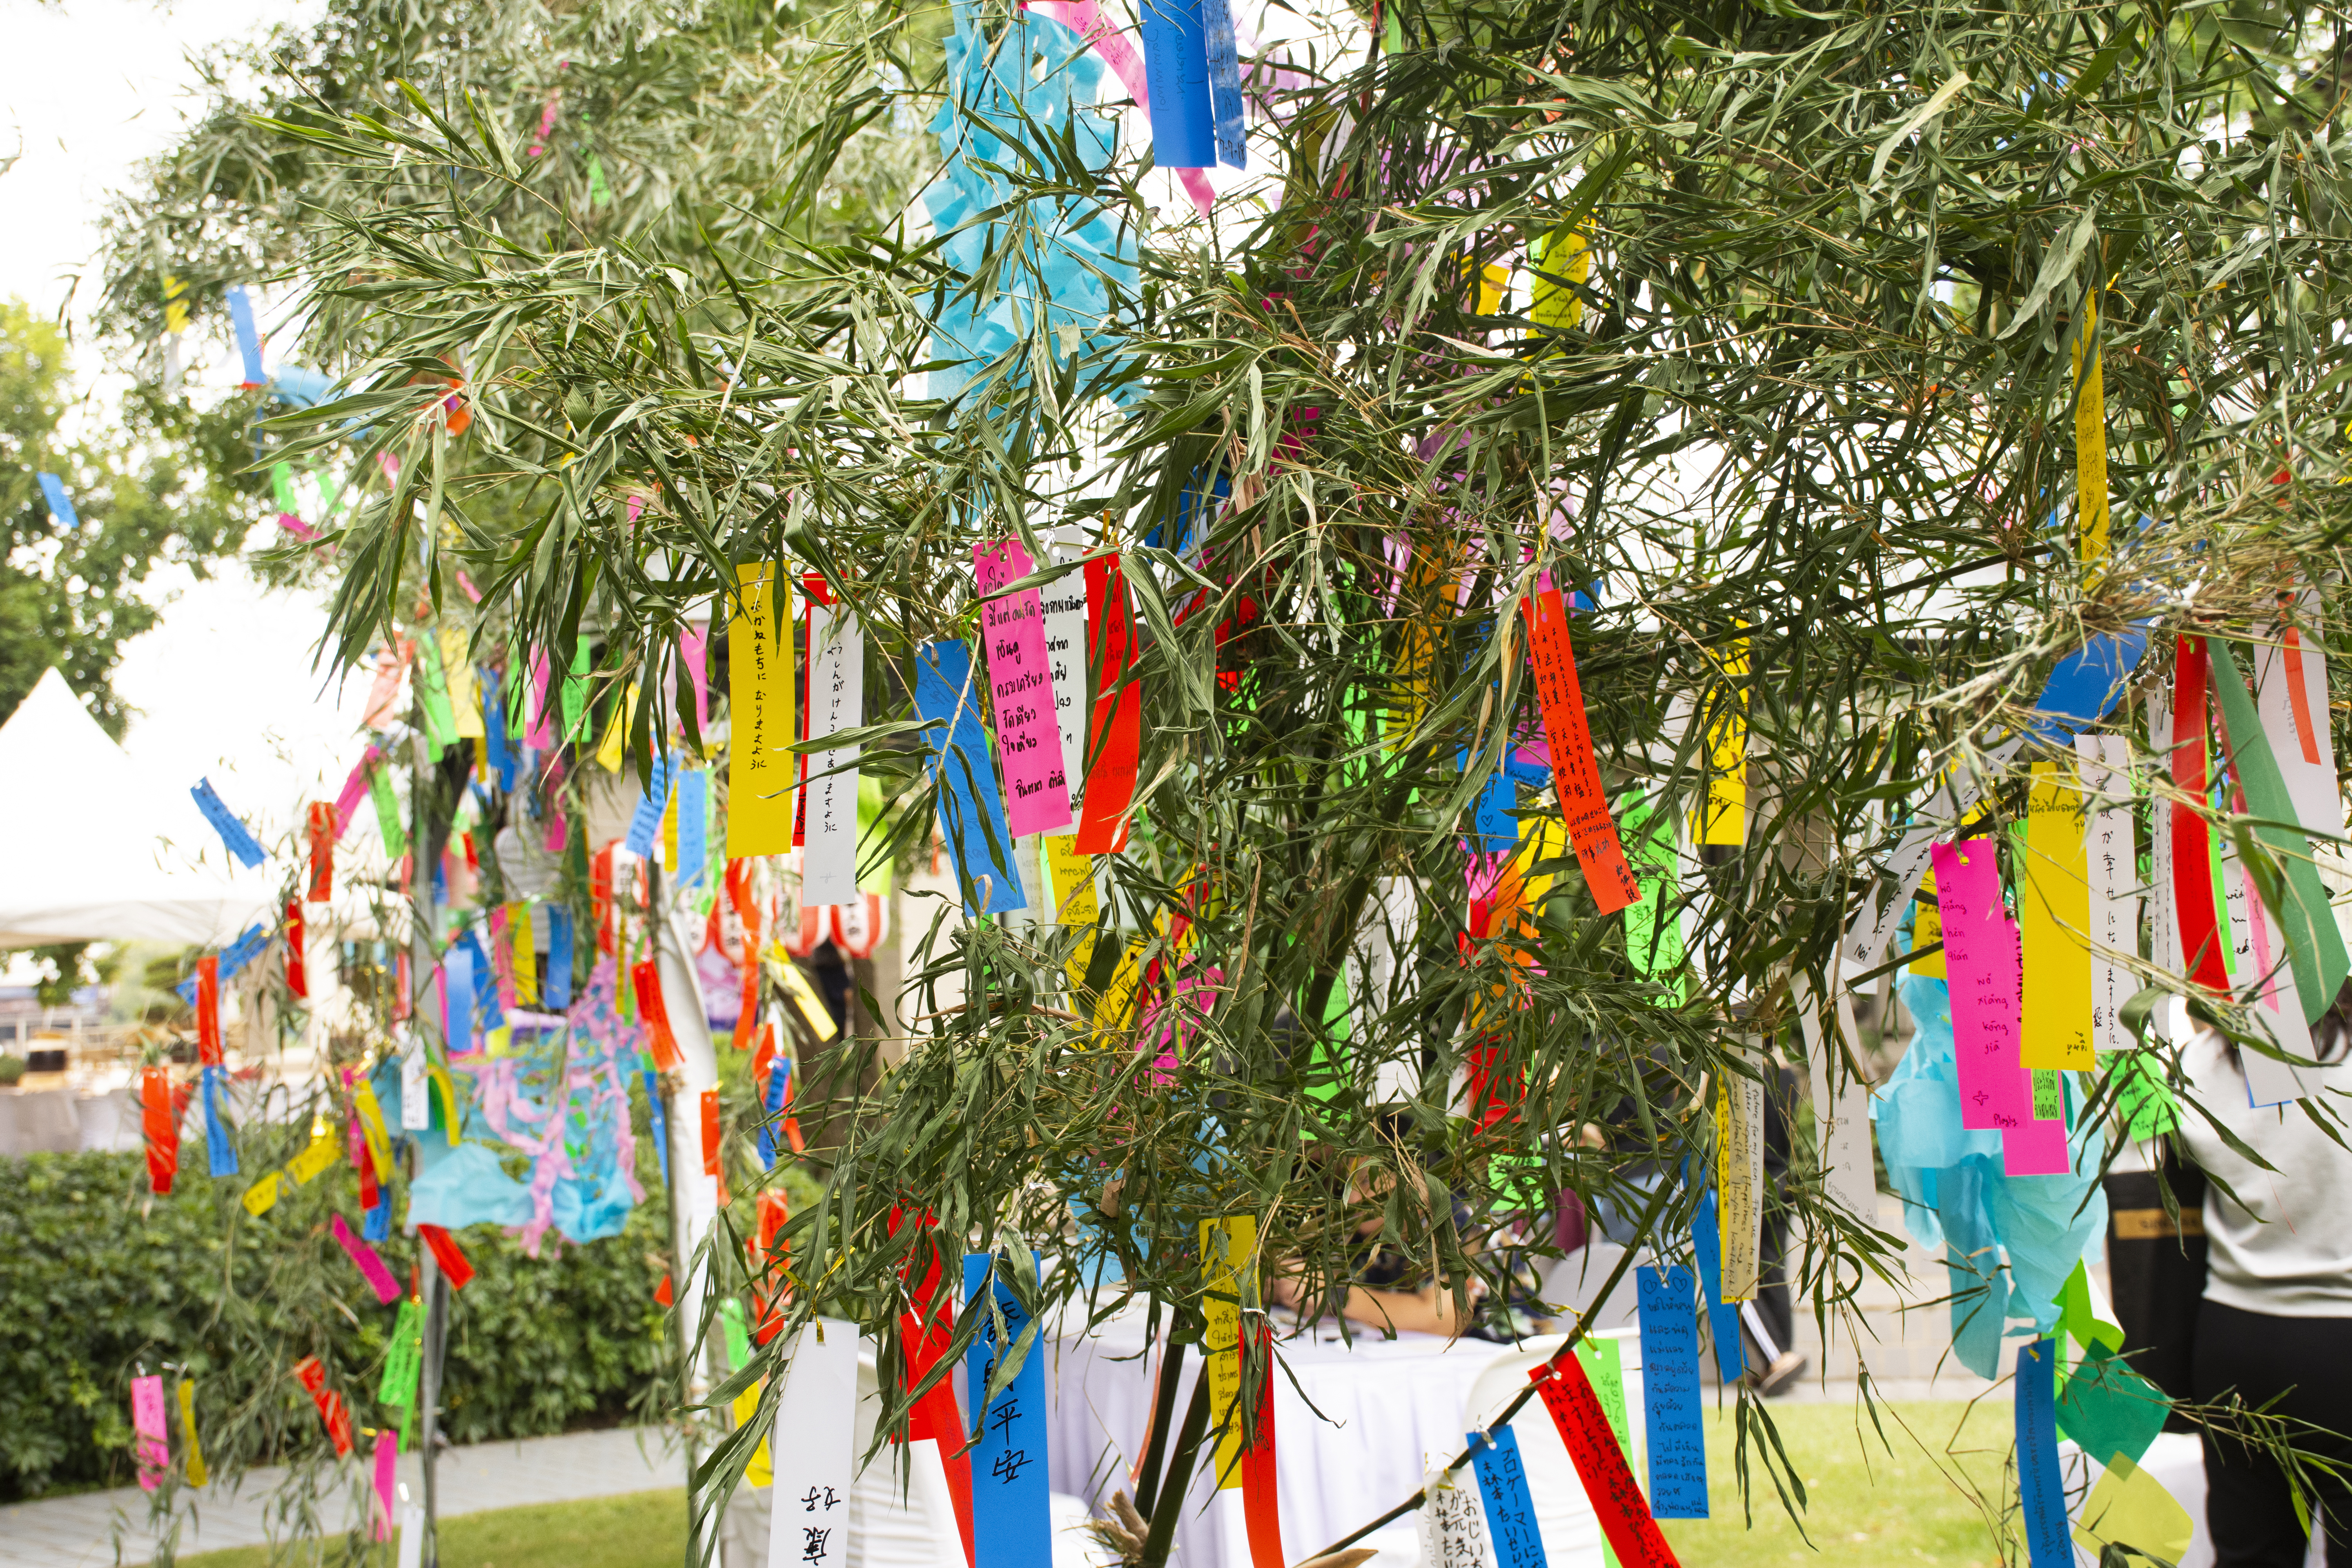 Tanabata: A Golden Opportunity to Connect with Japanese Culture